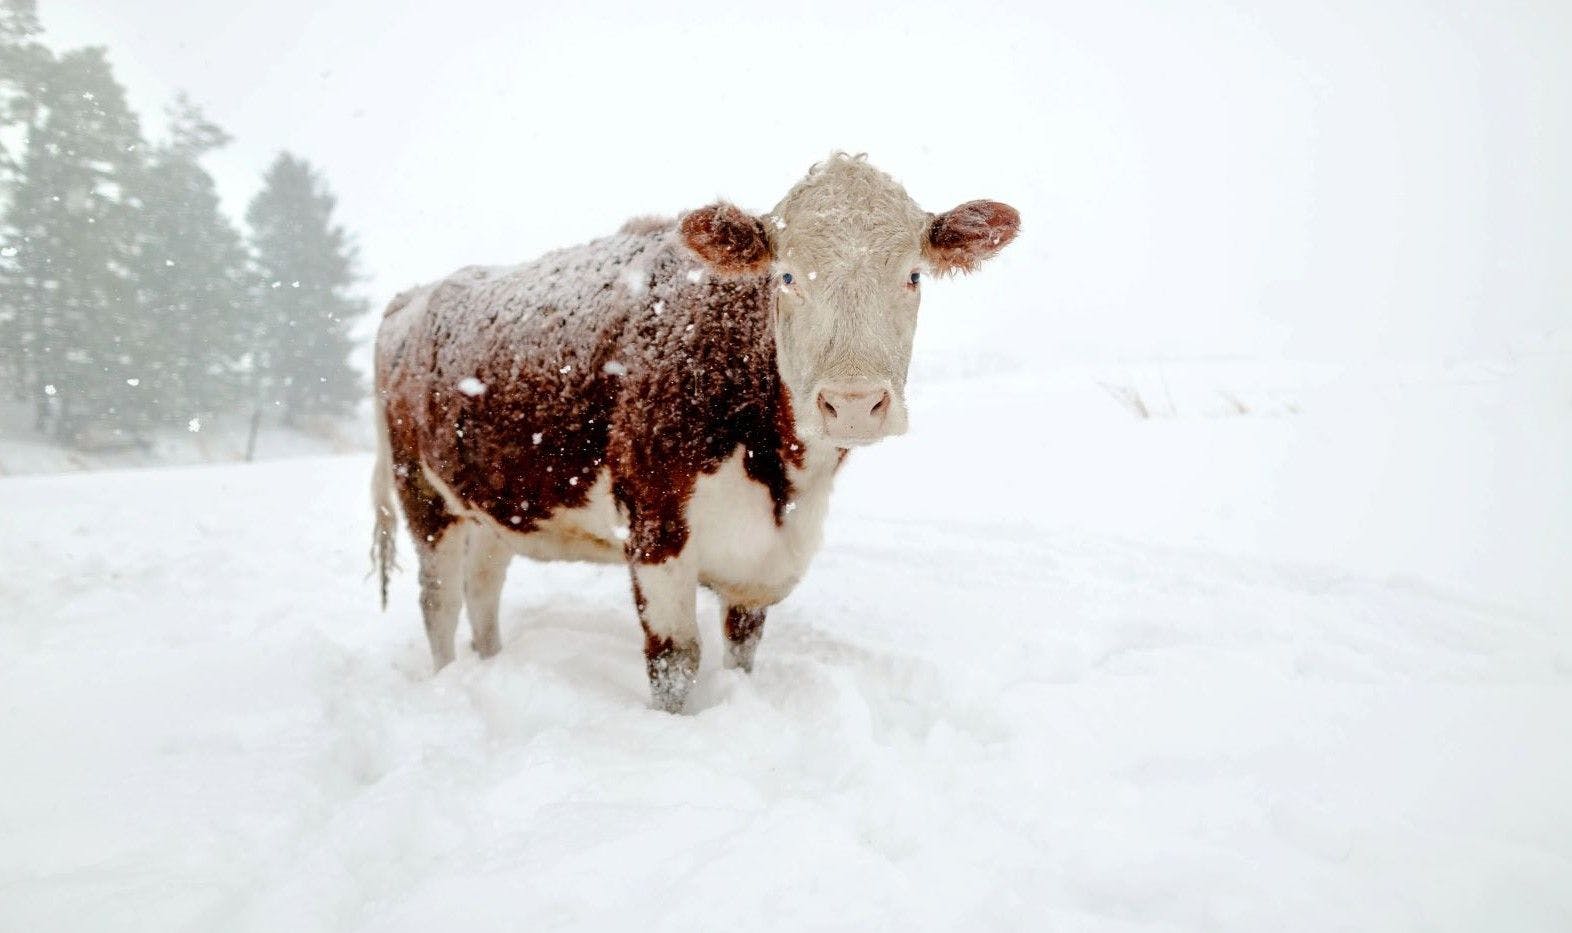 A cow stands in the snow at the Gretebeck farm in Wisconsin.